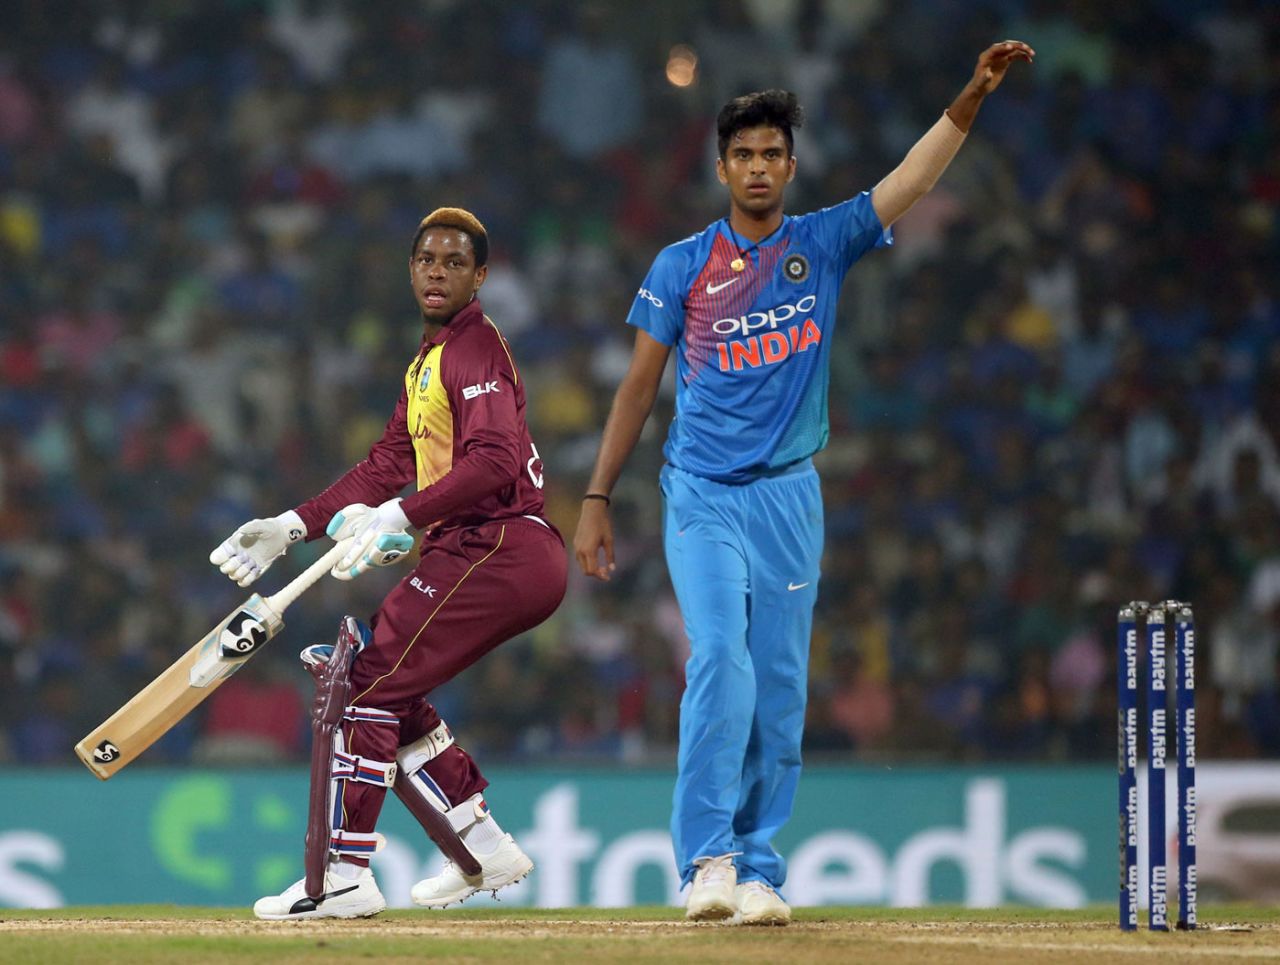 Washington Sundar signals to the fielder as Shimron Hetmyer thinks about another run, India v West Indies, 3rd T20I, Chennai, November 11, 2018